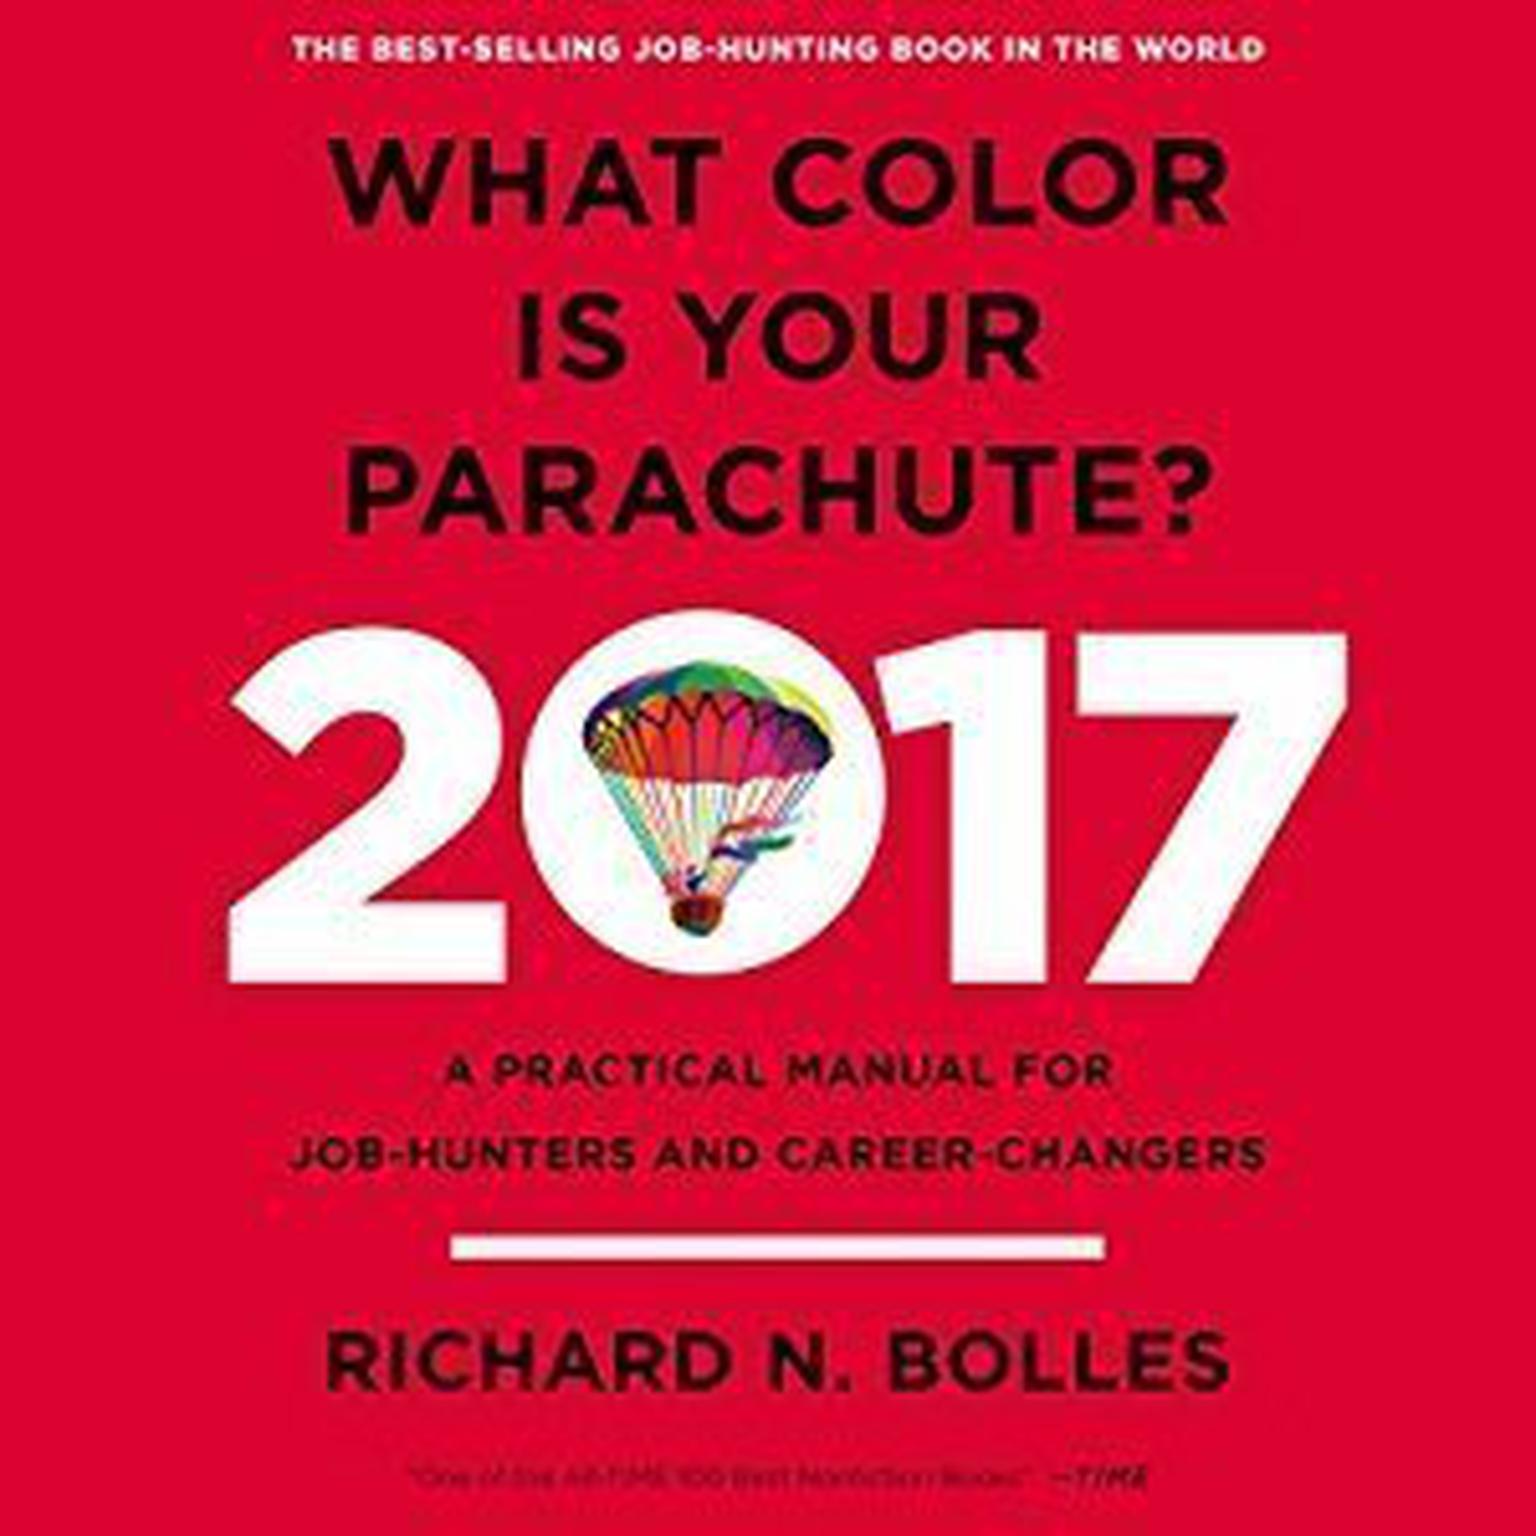 What Color is Your Parachute? 2017: A Practical Manual for Job-Hunters and Career-Changers Audiobook, by Richard N. Bolles